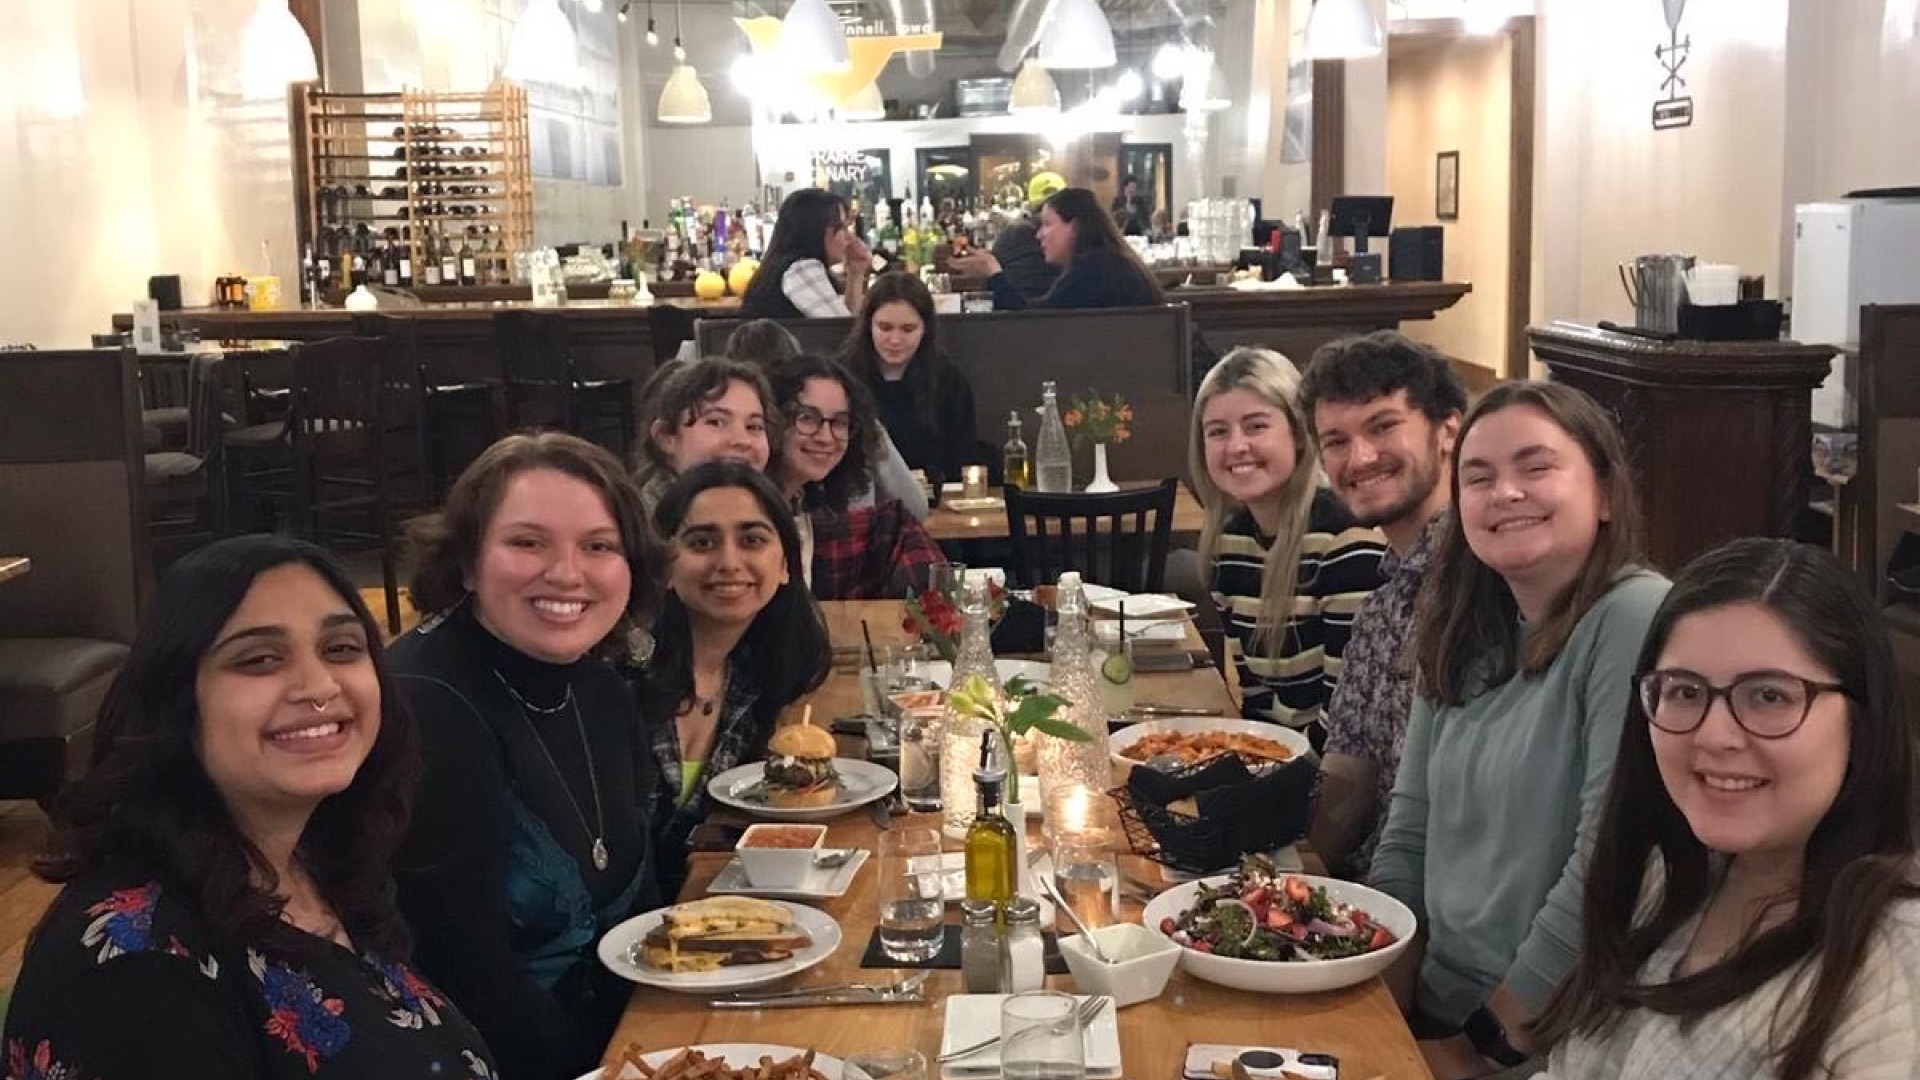 My eight friends and I all gather in front of a long wooden rectangular table in a local restaurant. We all have foods in front of us and are smiling at the camera.